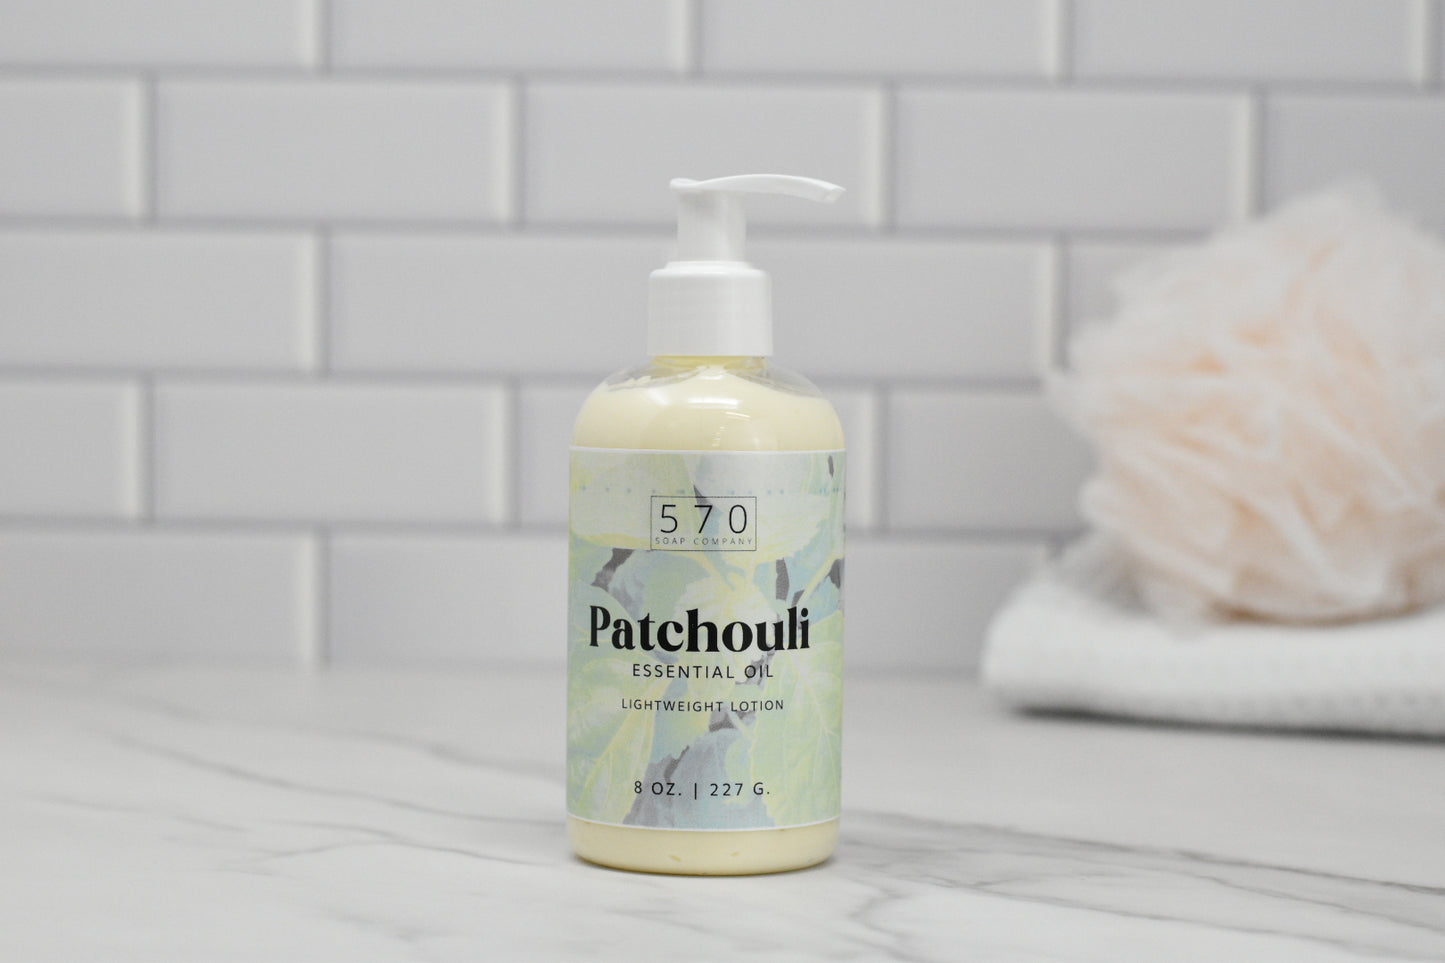 Patchouli Lightweight Lotion - Essential Oil